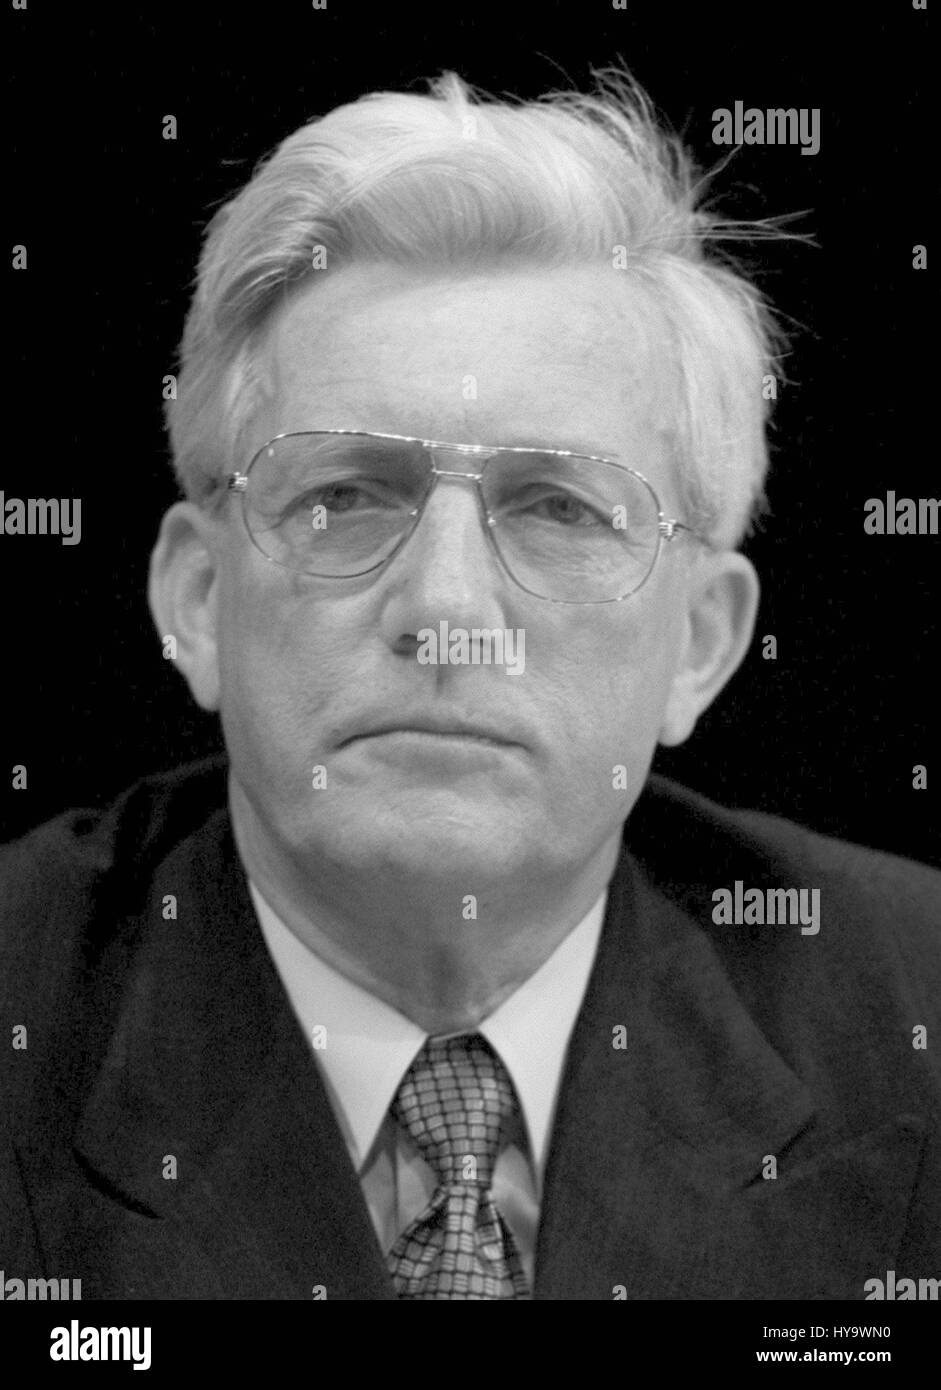 FILE - Former Ruhrgas chairman and Volkswagen supervisory board chairman Klaus Liesen, photographed in June 1994. Liesen died on 30 March 2017, having aged 85 years. Photo: Holger Hollemann/dpa Stock Photo